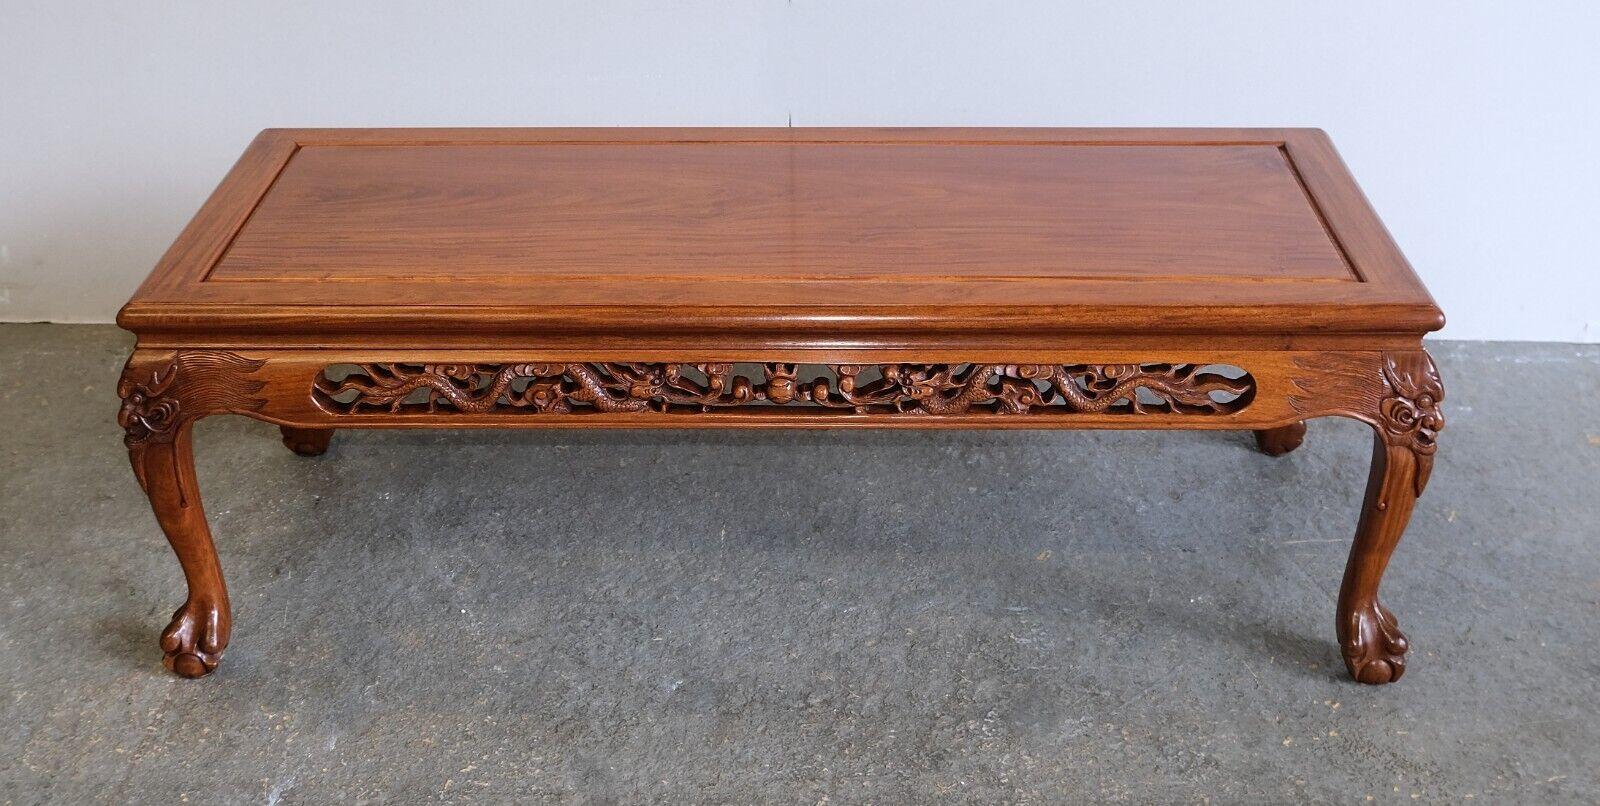 We are delighted to offer for sale this gorgeous Japanese Chinese hand carved coffee table with dragons and claw ball feet.  

This attractive, well made, and hand carved coffee table is an eye catcher from any angle. The beautiful dragons around